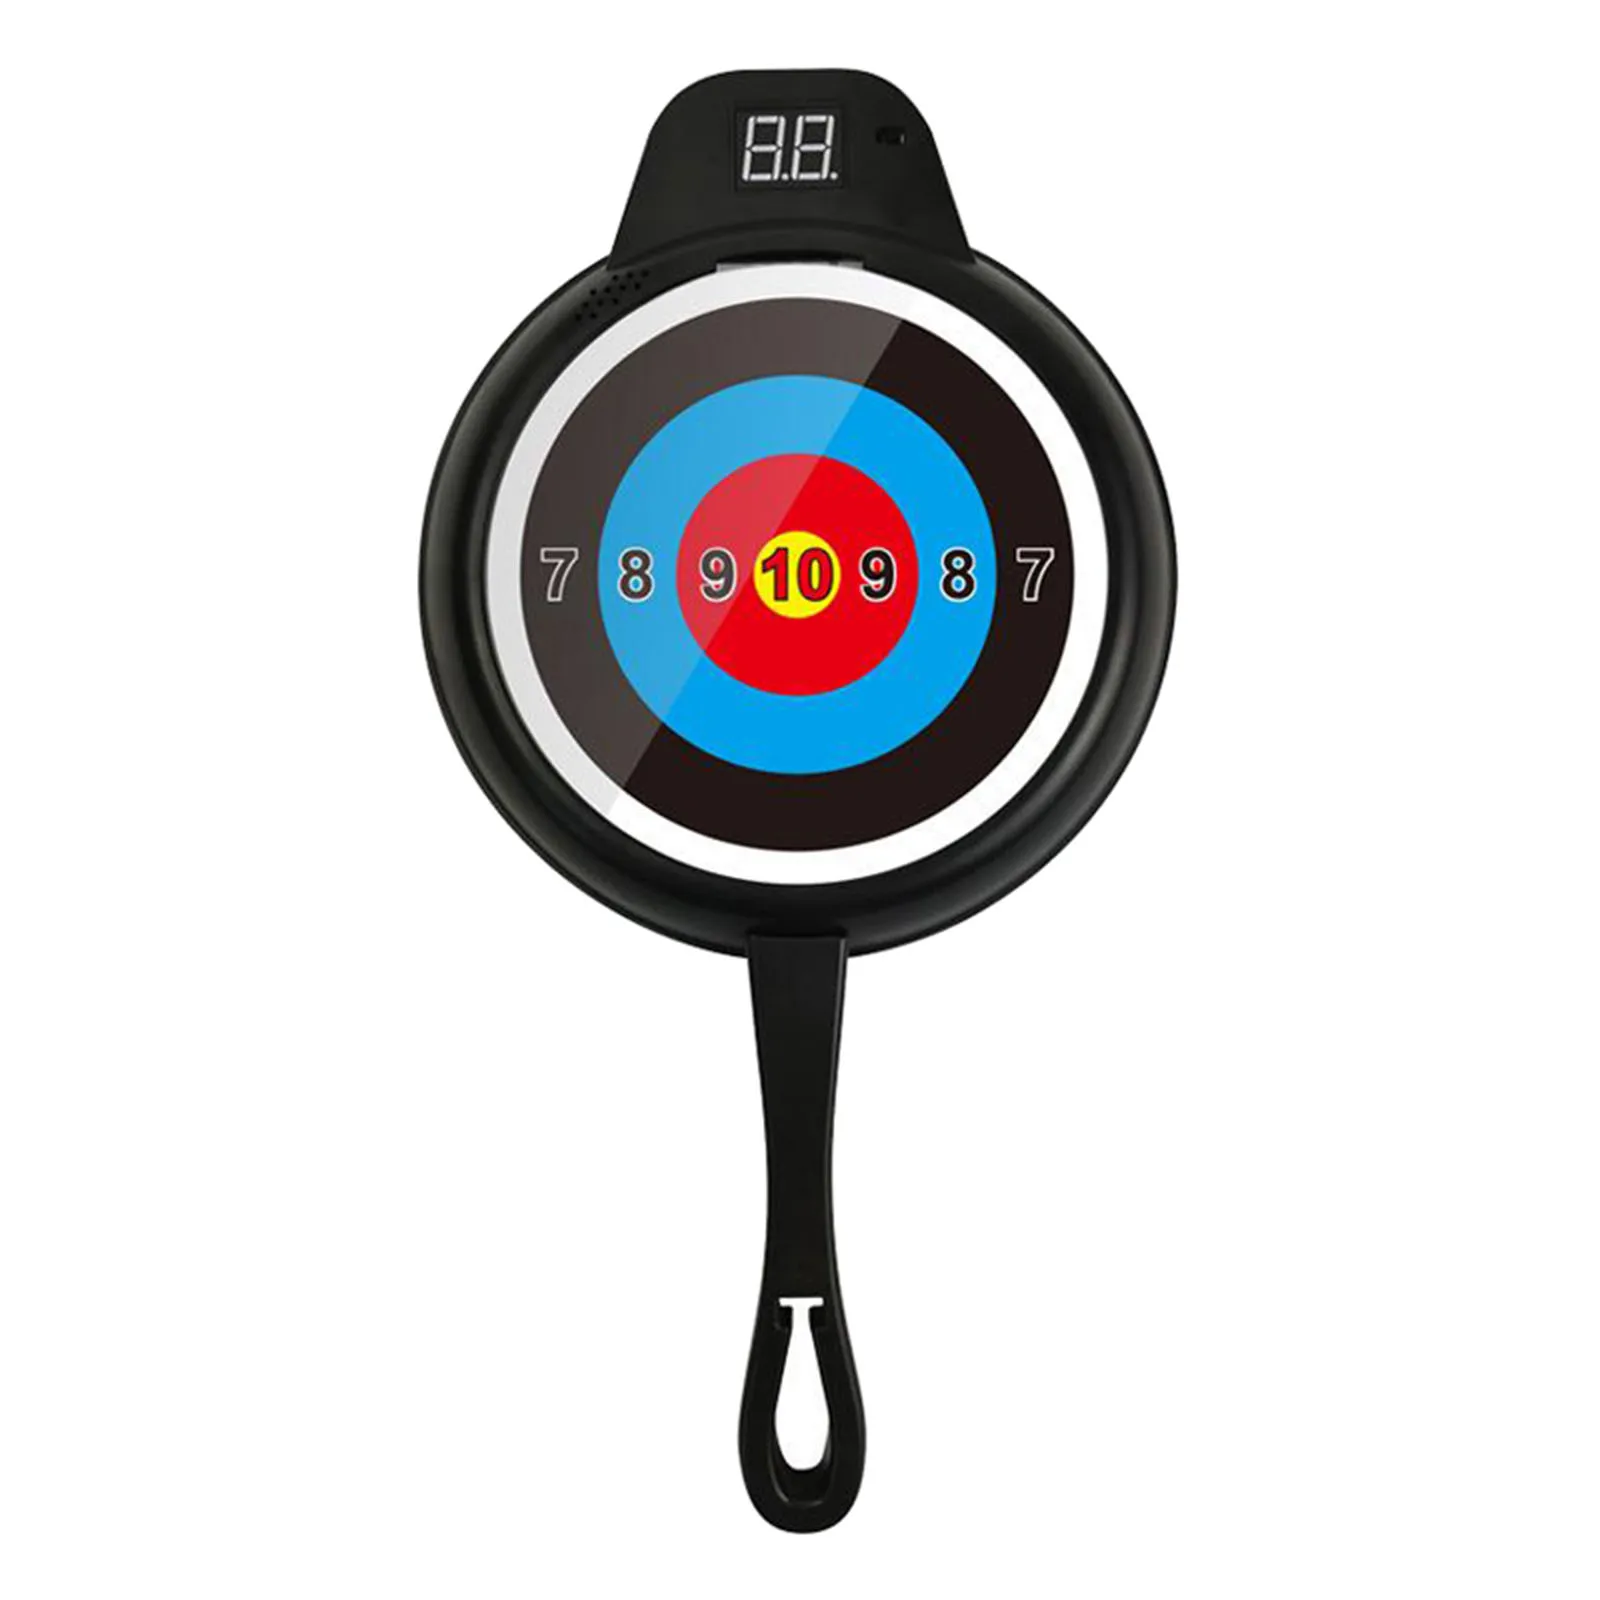 Digital Electric Target Mat Scoring Targets Shooting Practice Accessory Training Toy